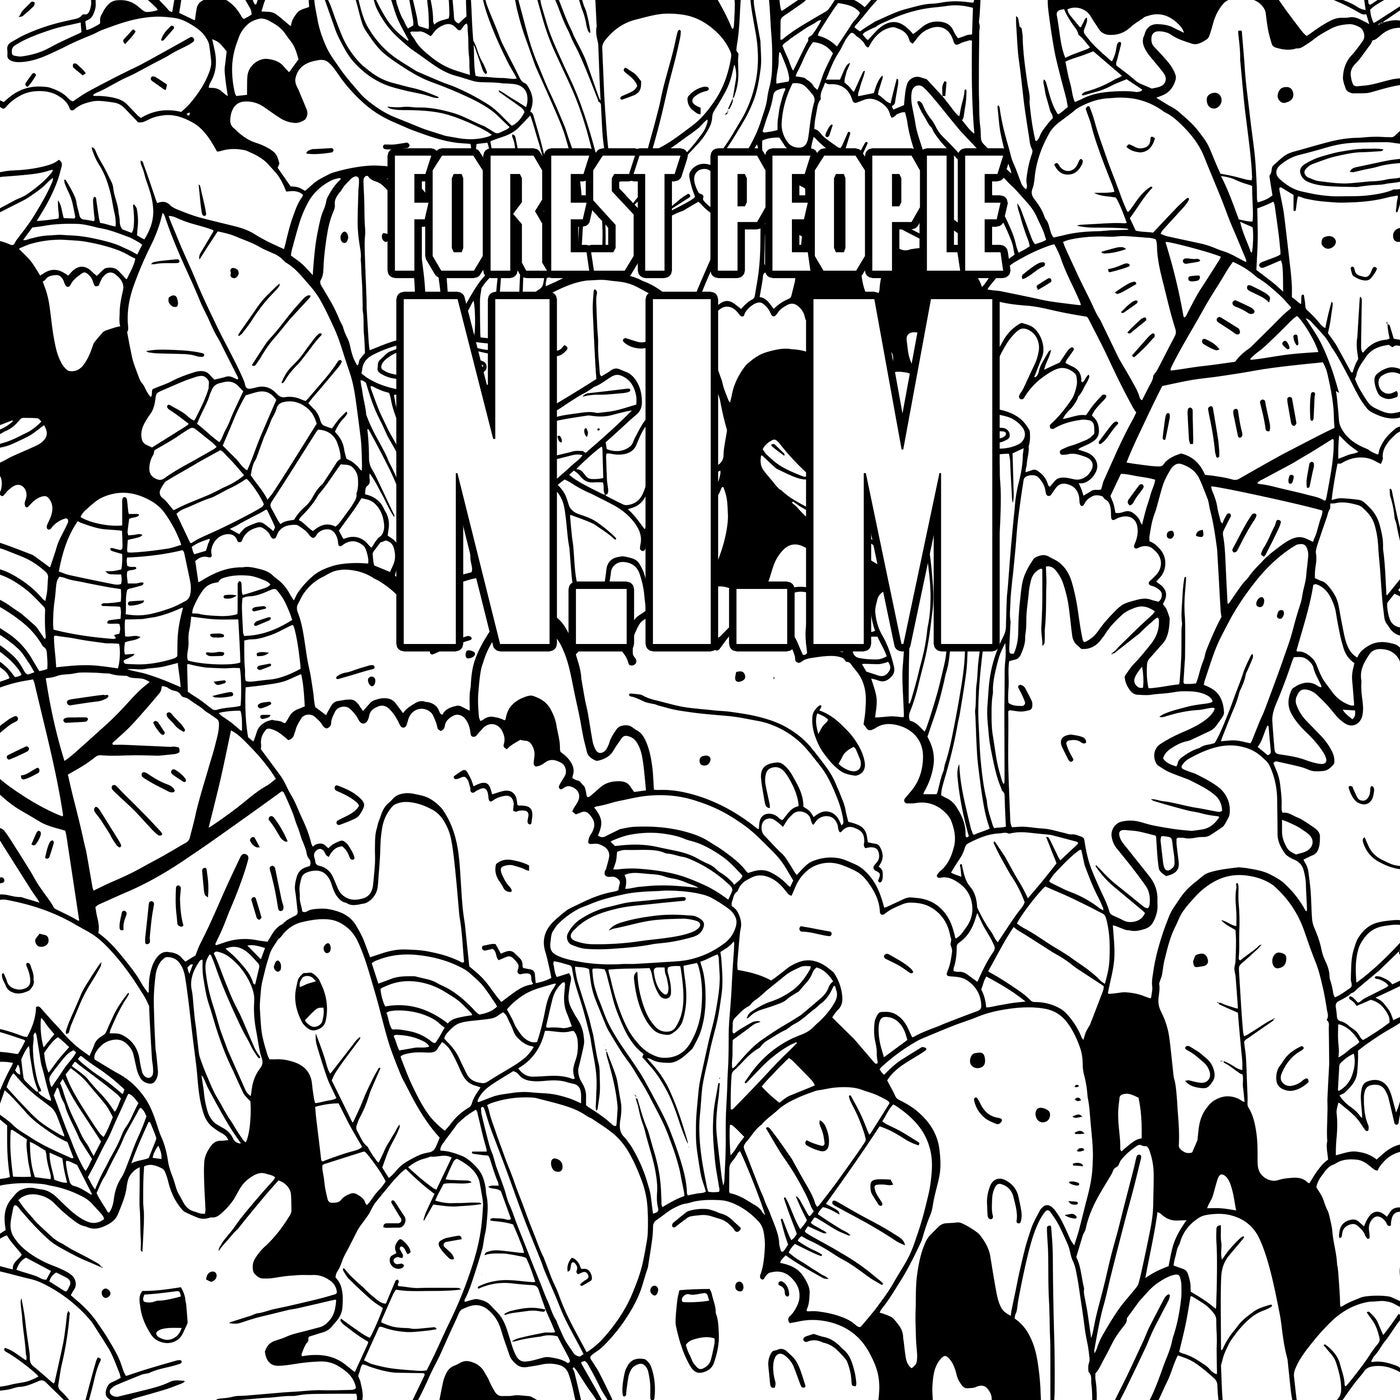 Forest People